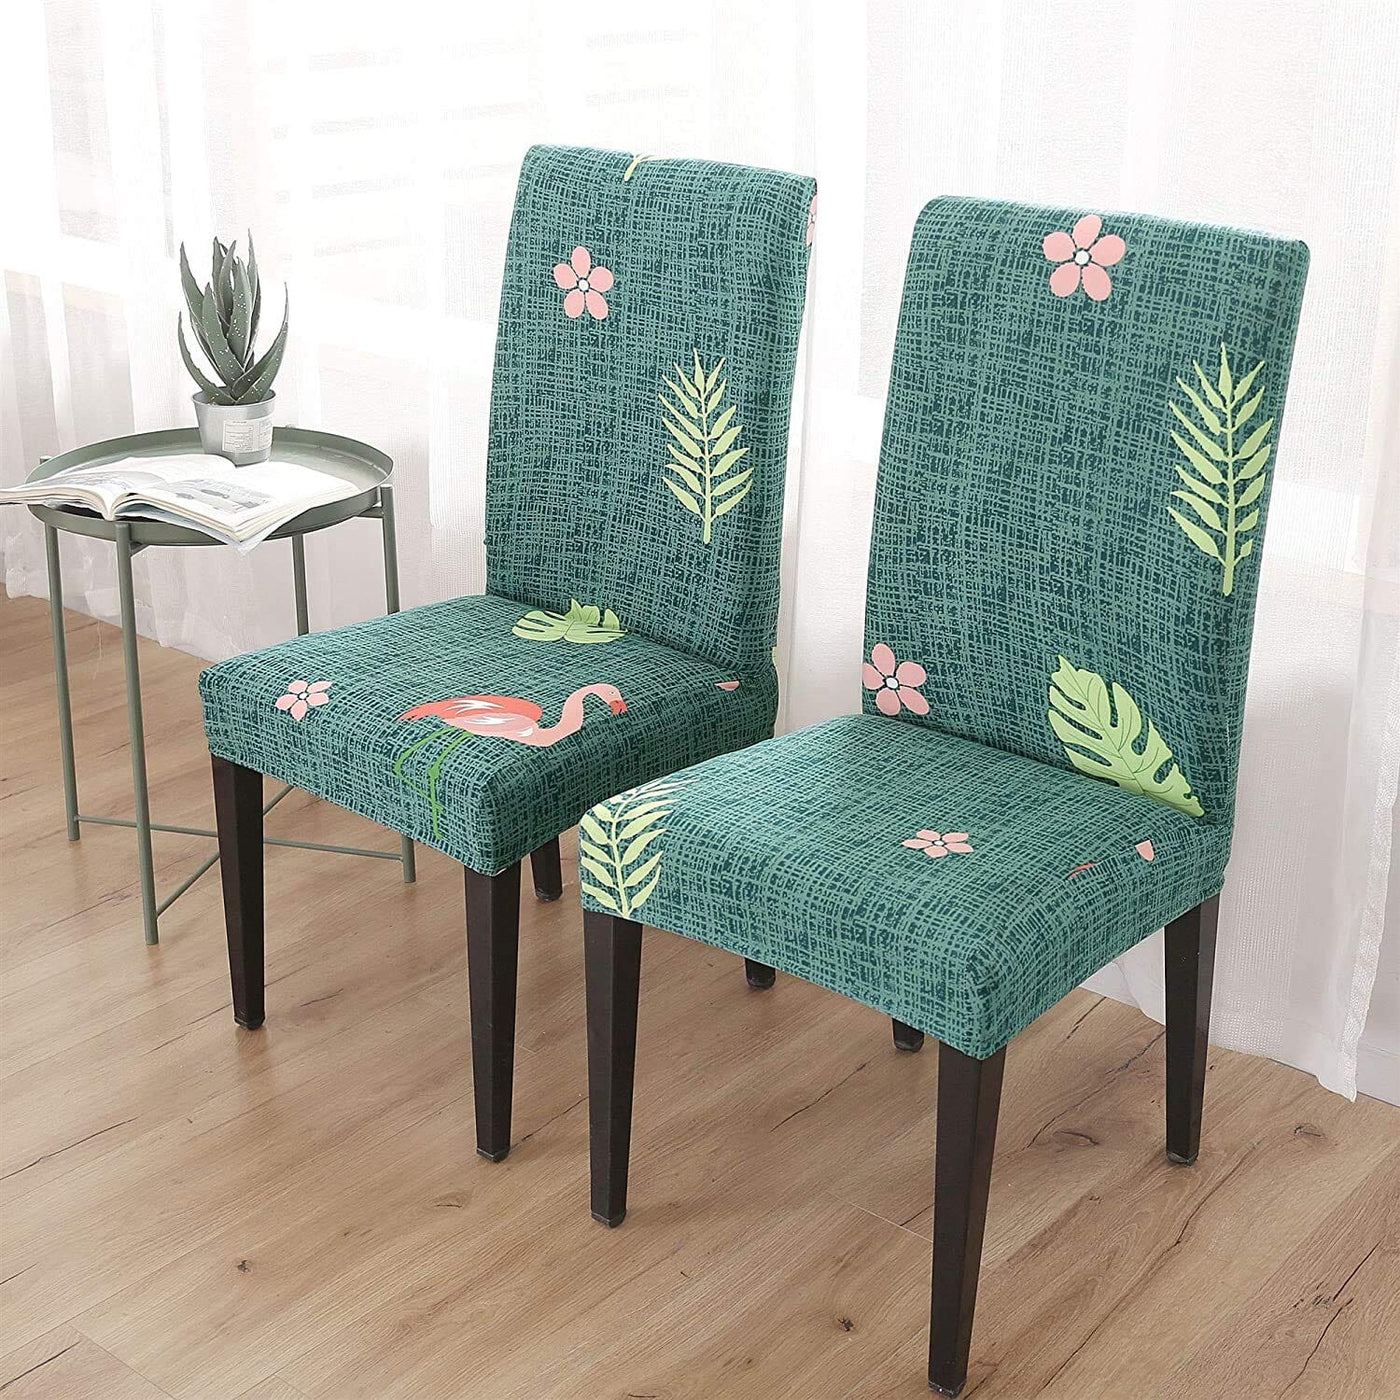 Green Flamingo Premium Chair Cover - Stretchable & Elastic Fitted Great Happy IN 2 PCS - ₹799 